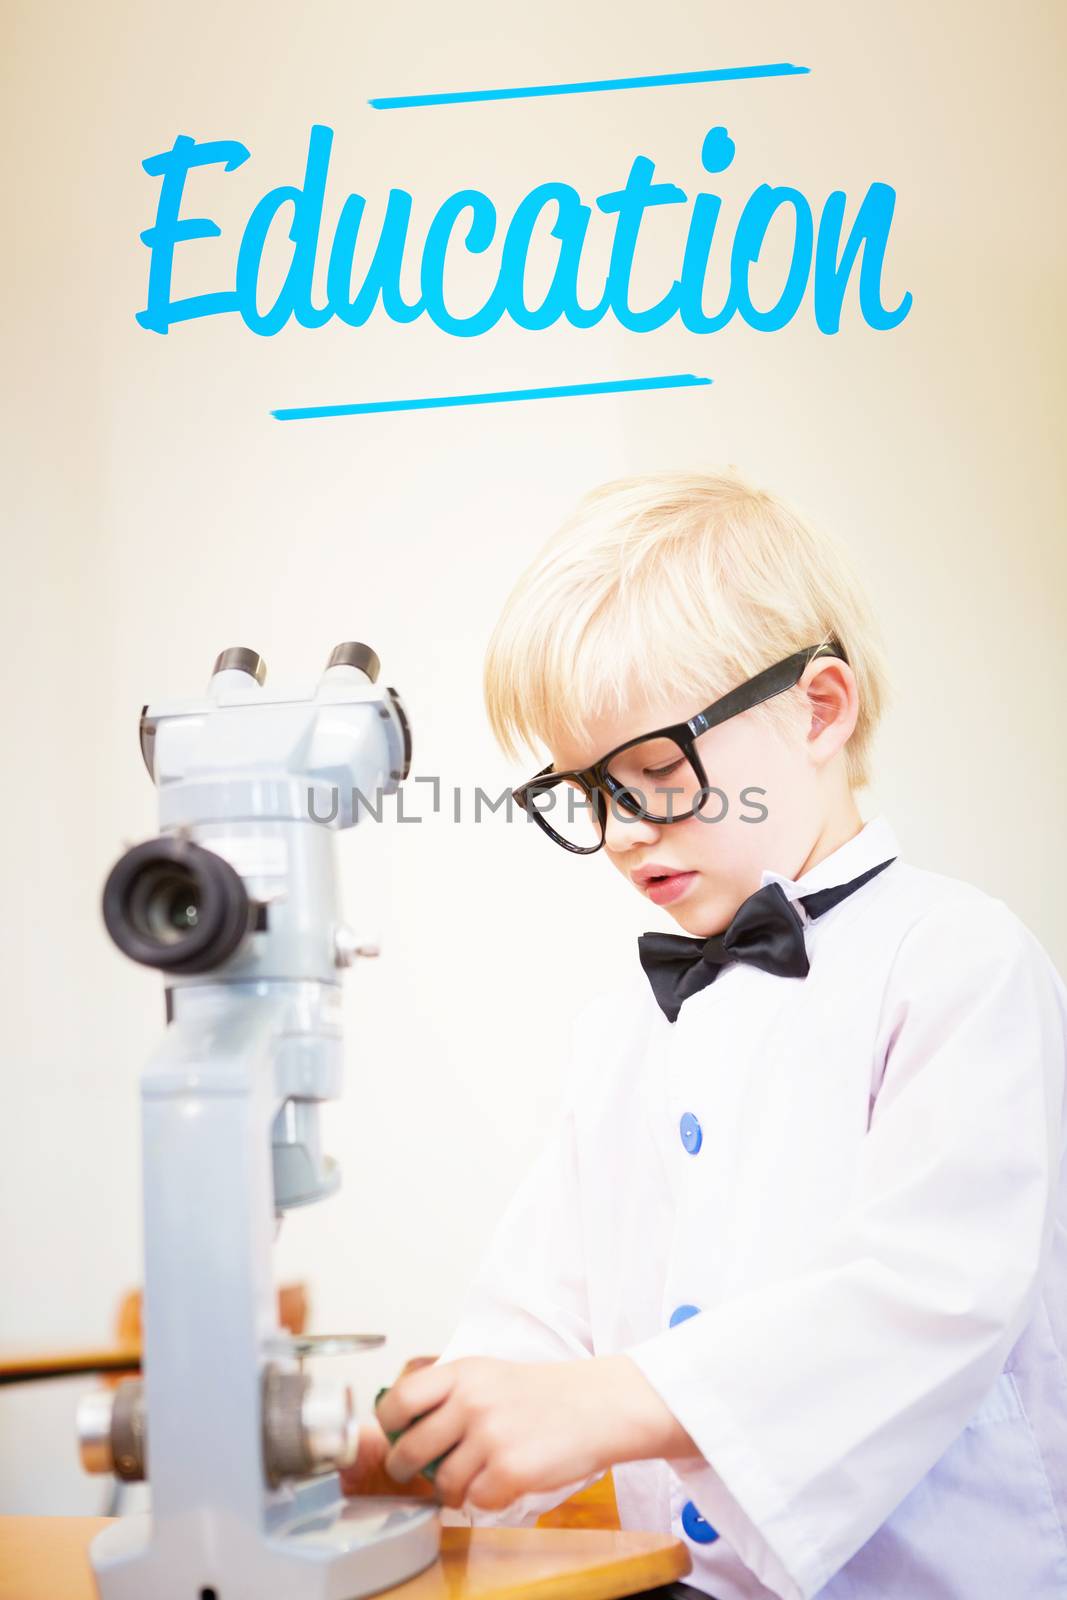 The word education against cute pupil dressed up as scientist in classroom